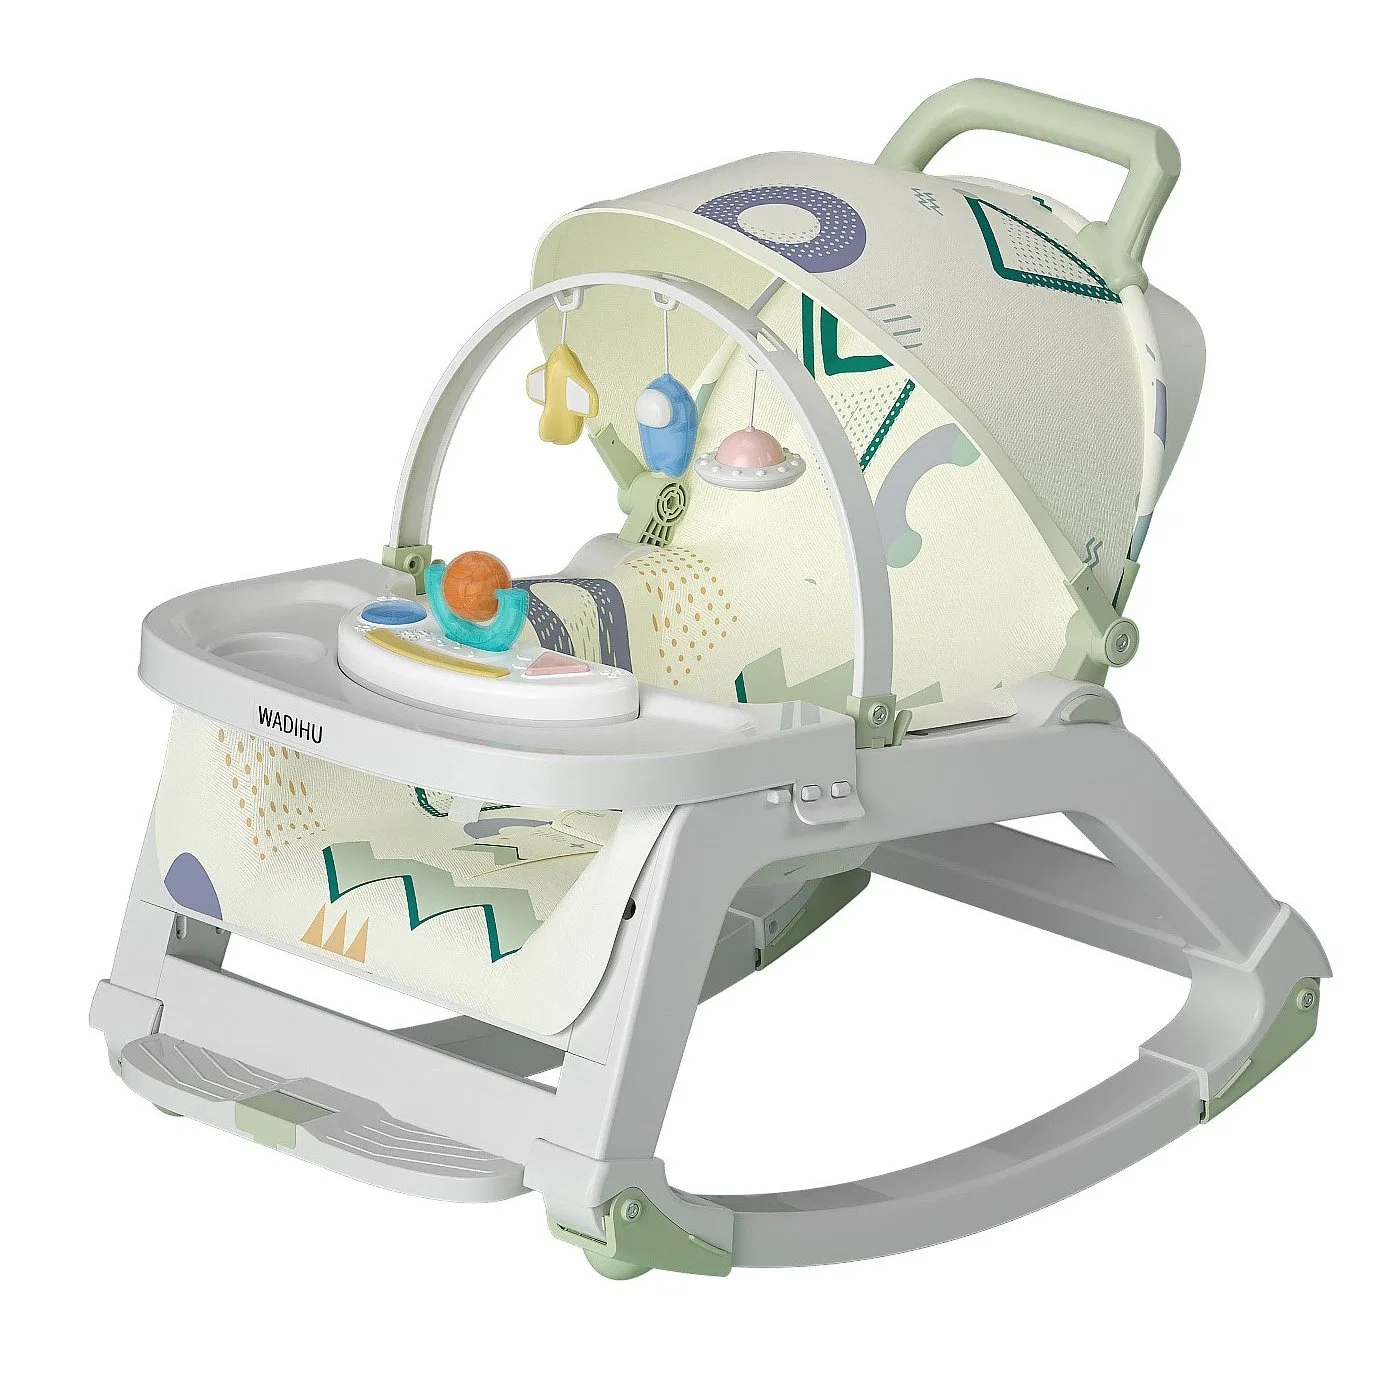 5 in 1 Baby Bouncer Plush Baby Rocking Chair Toys Sleep Toys Sound Machine White Noise Swing Baby Cradle Swing Bed